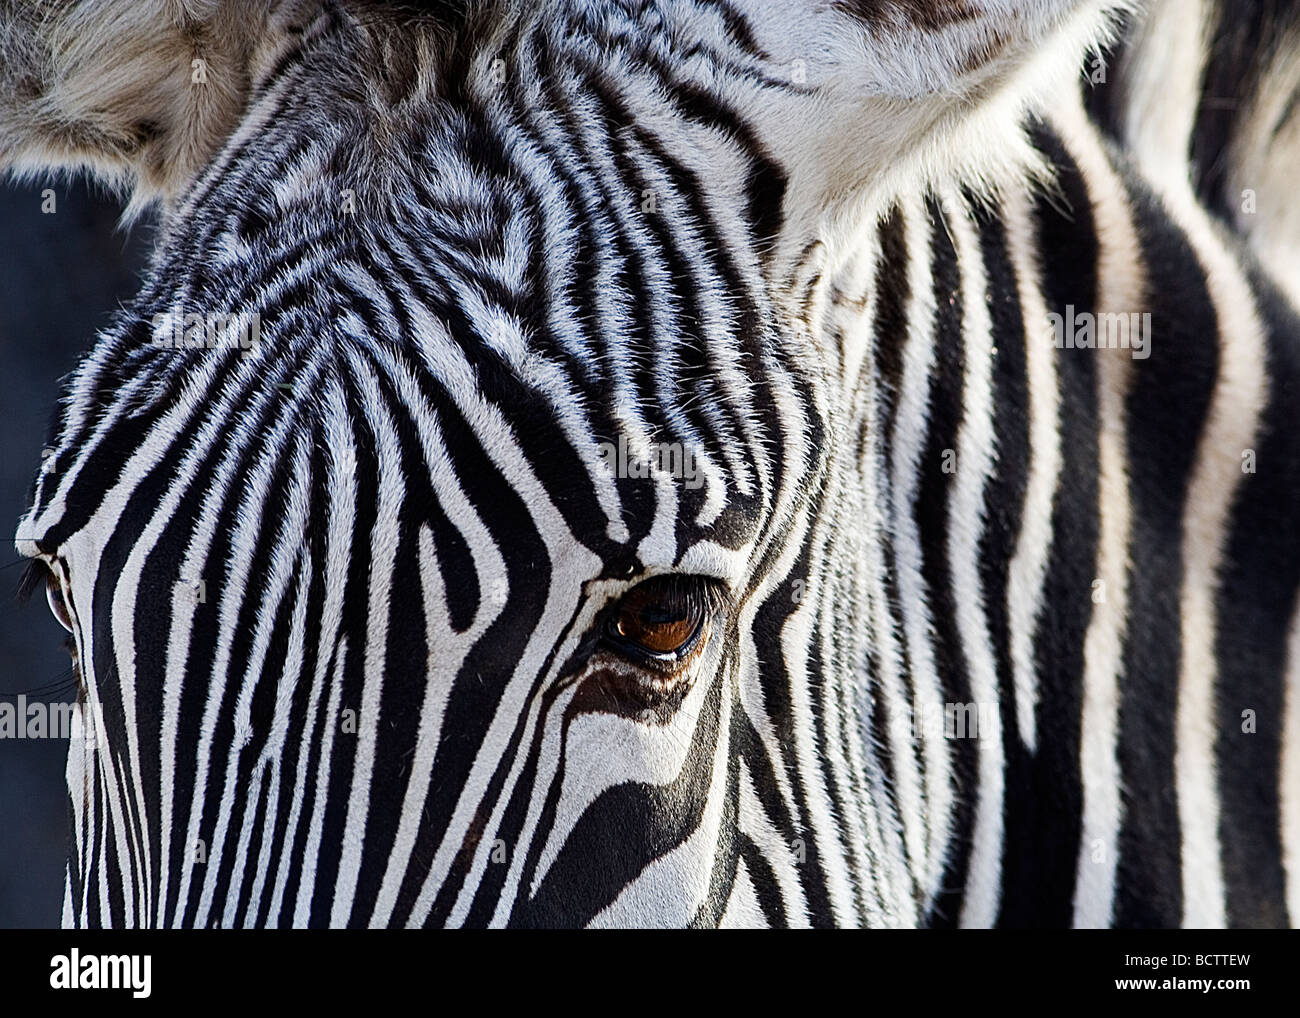 An intimate photograph of a zebra's head and neck. Stock Photo